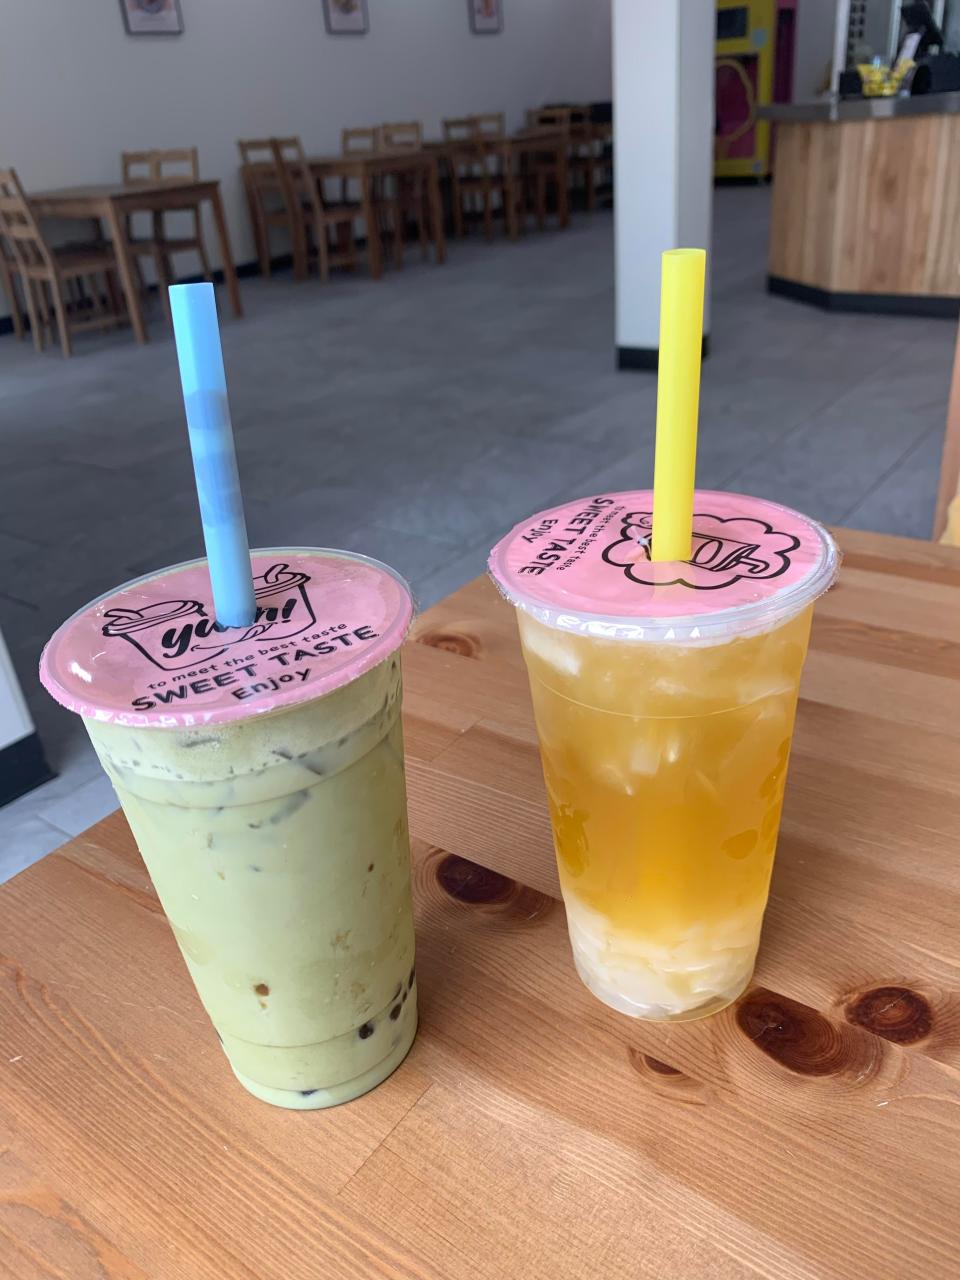 Matcha milk tea with traditional boba, left, and mango and passionfruit tea with lychee jelly are two of many boba bar options at Poke & Roll in Cuyahoga Falls.